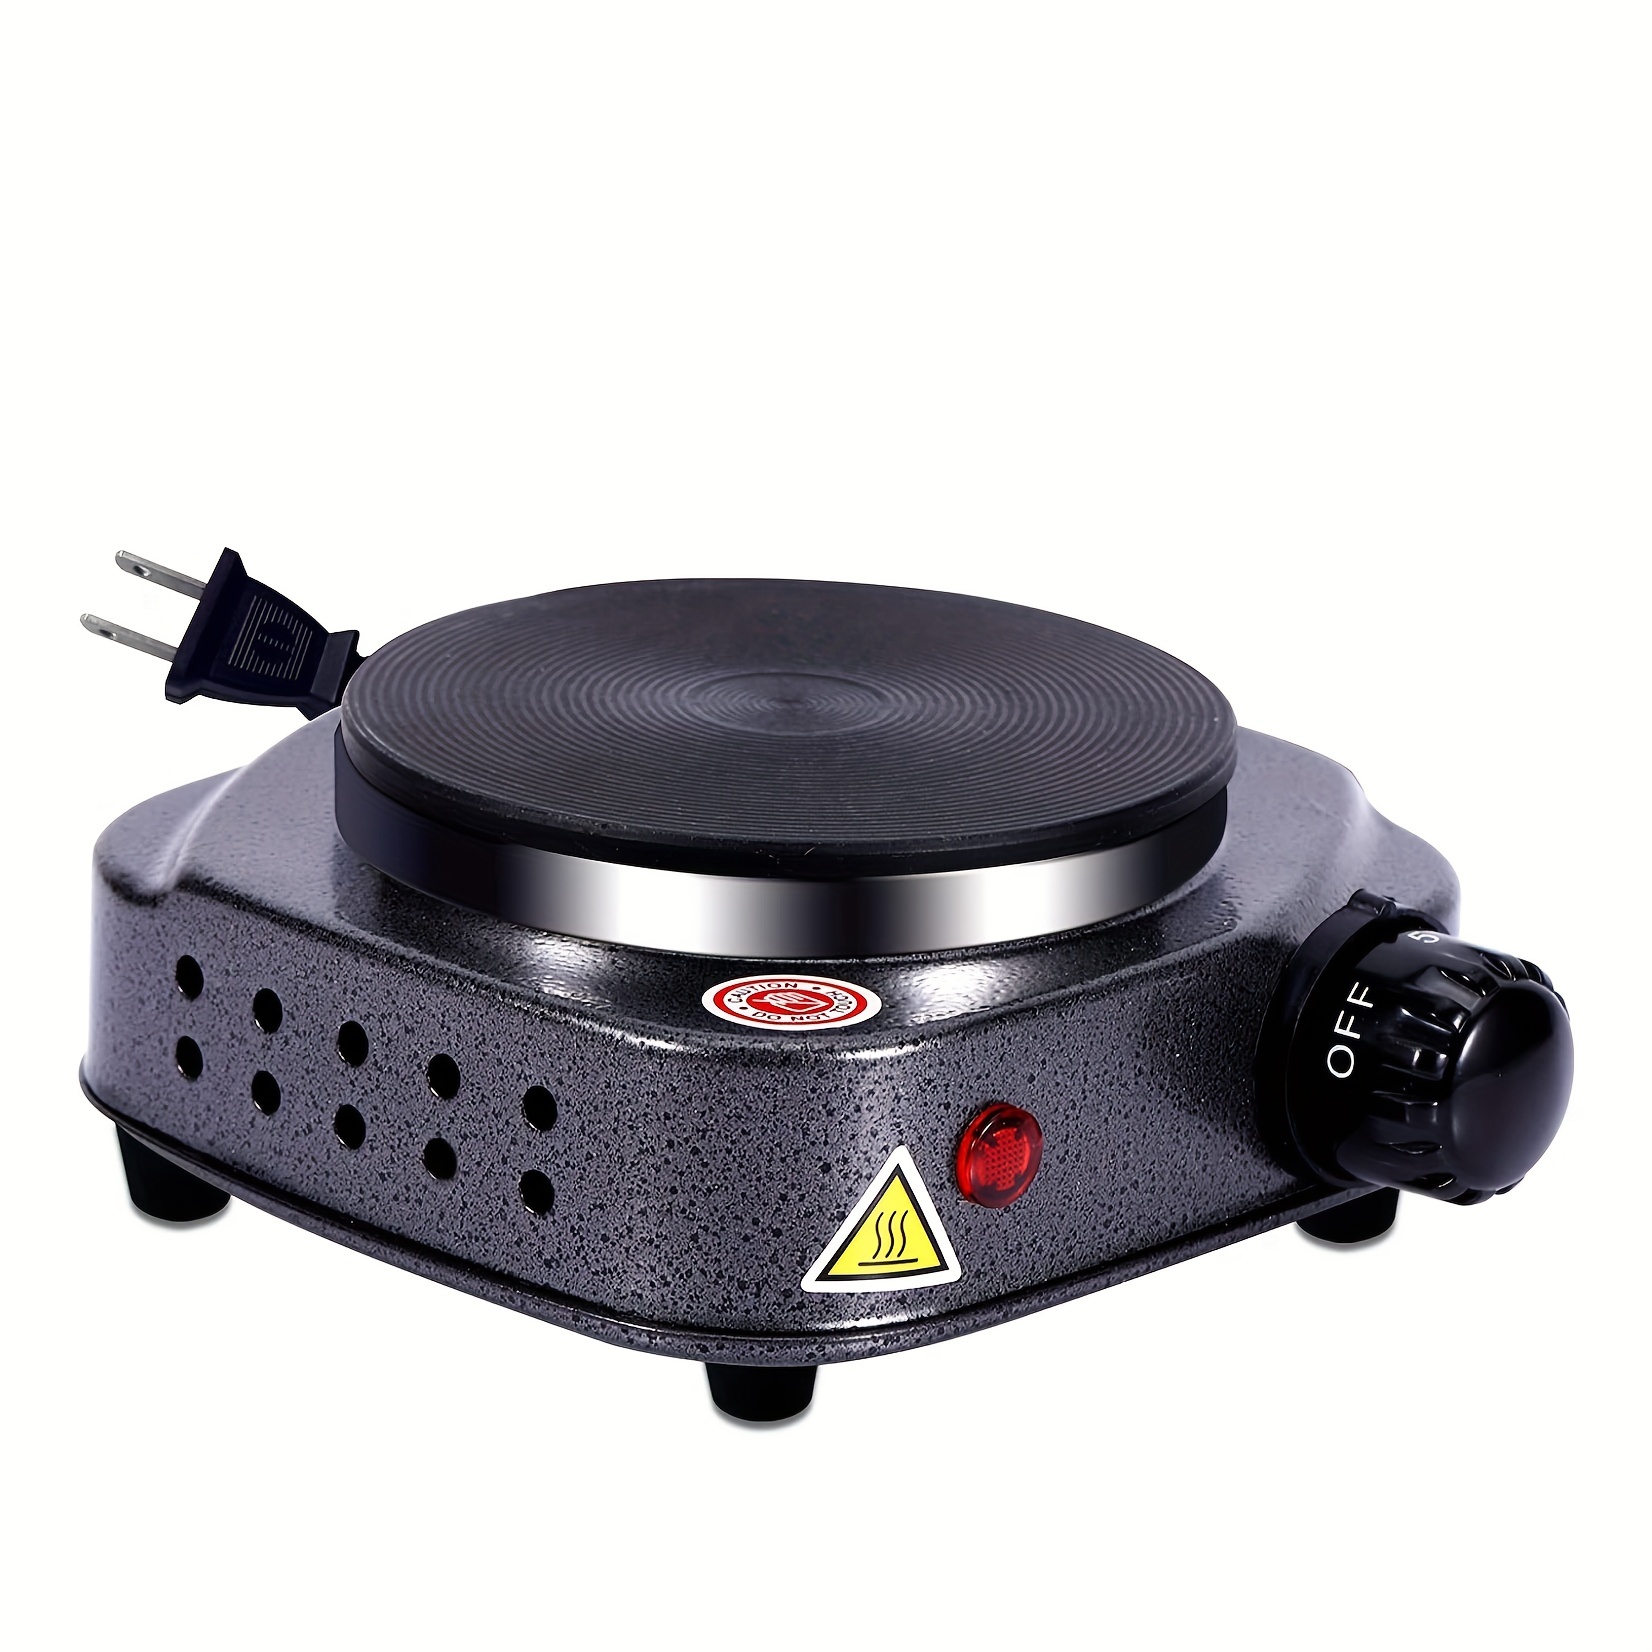 Hot Plate for Candle Making,Electric Single Burner for Cooking, Portable  Electri